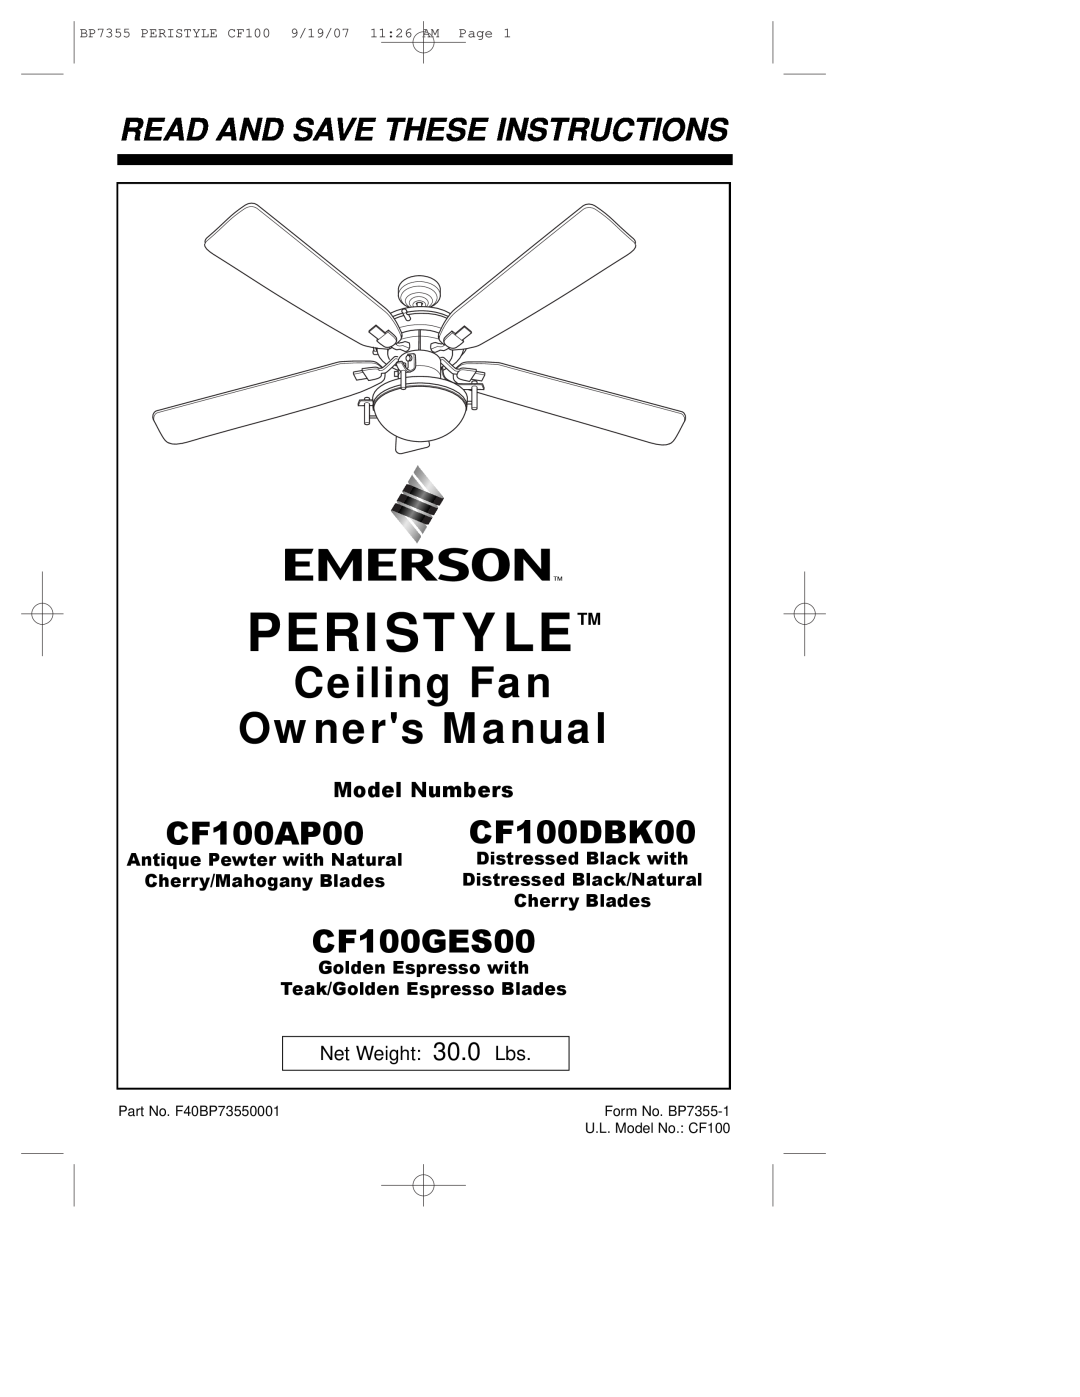 Emerson CF100AP00 owner manual Peristyle, CF100GES00, Read And Save These Instructions, CF100DBK00, Model Numbers 